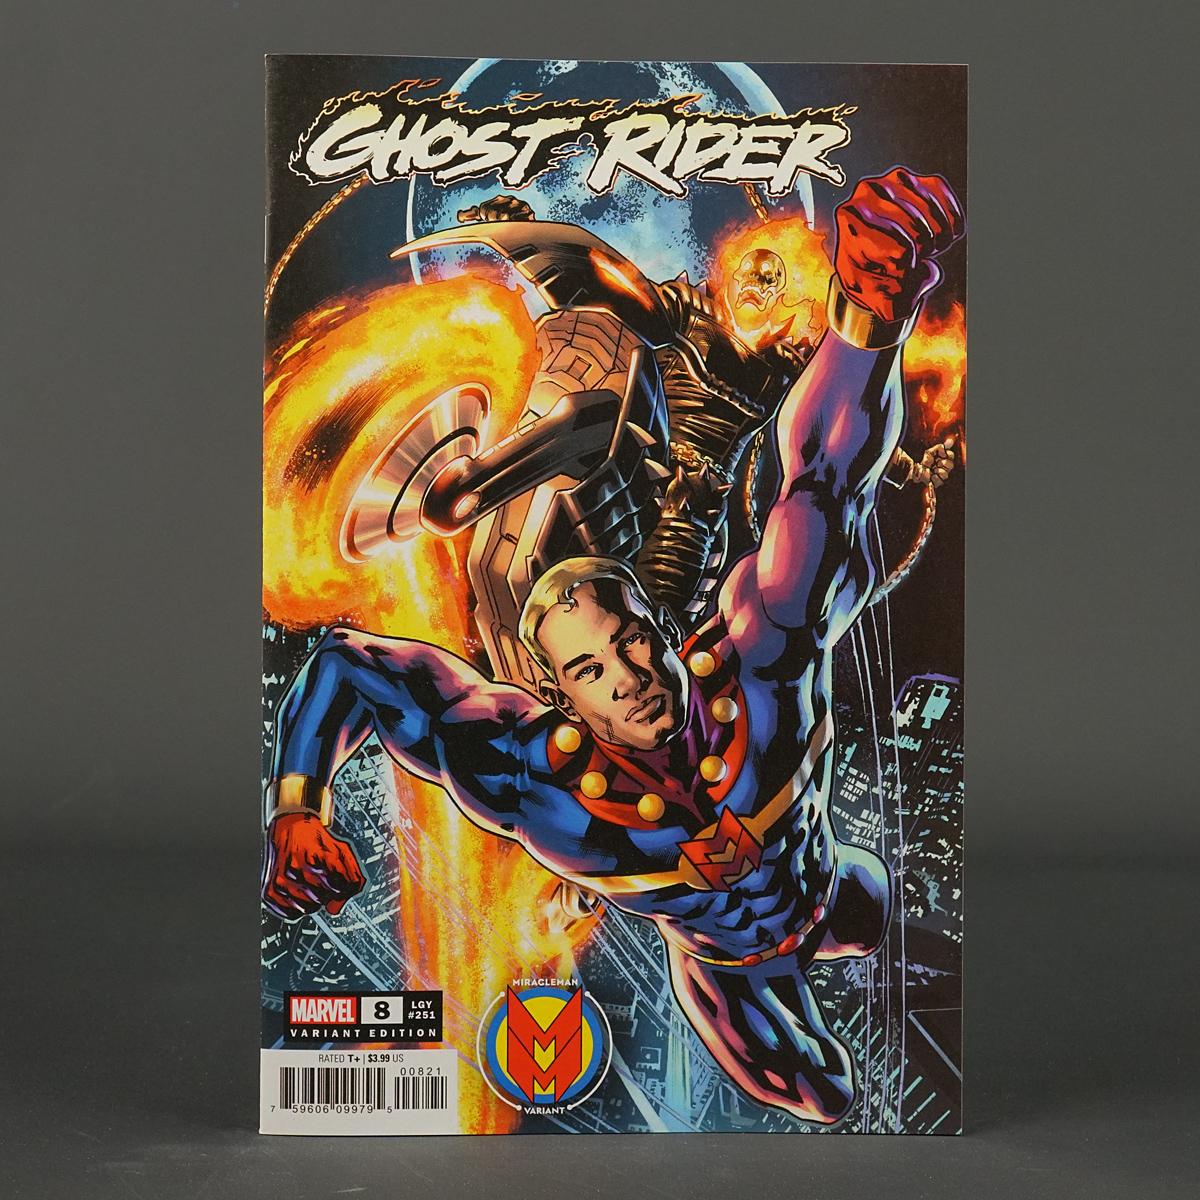 GHOST RIDER #8 var Miracleman Marvel Comics 2022 SEP221024 (CA) Hitch (W) Percy